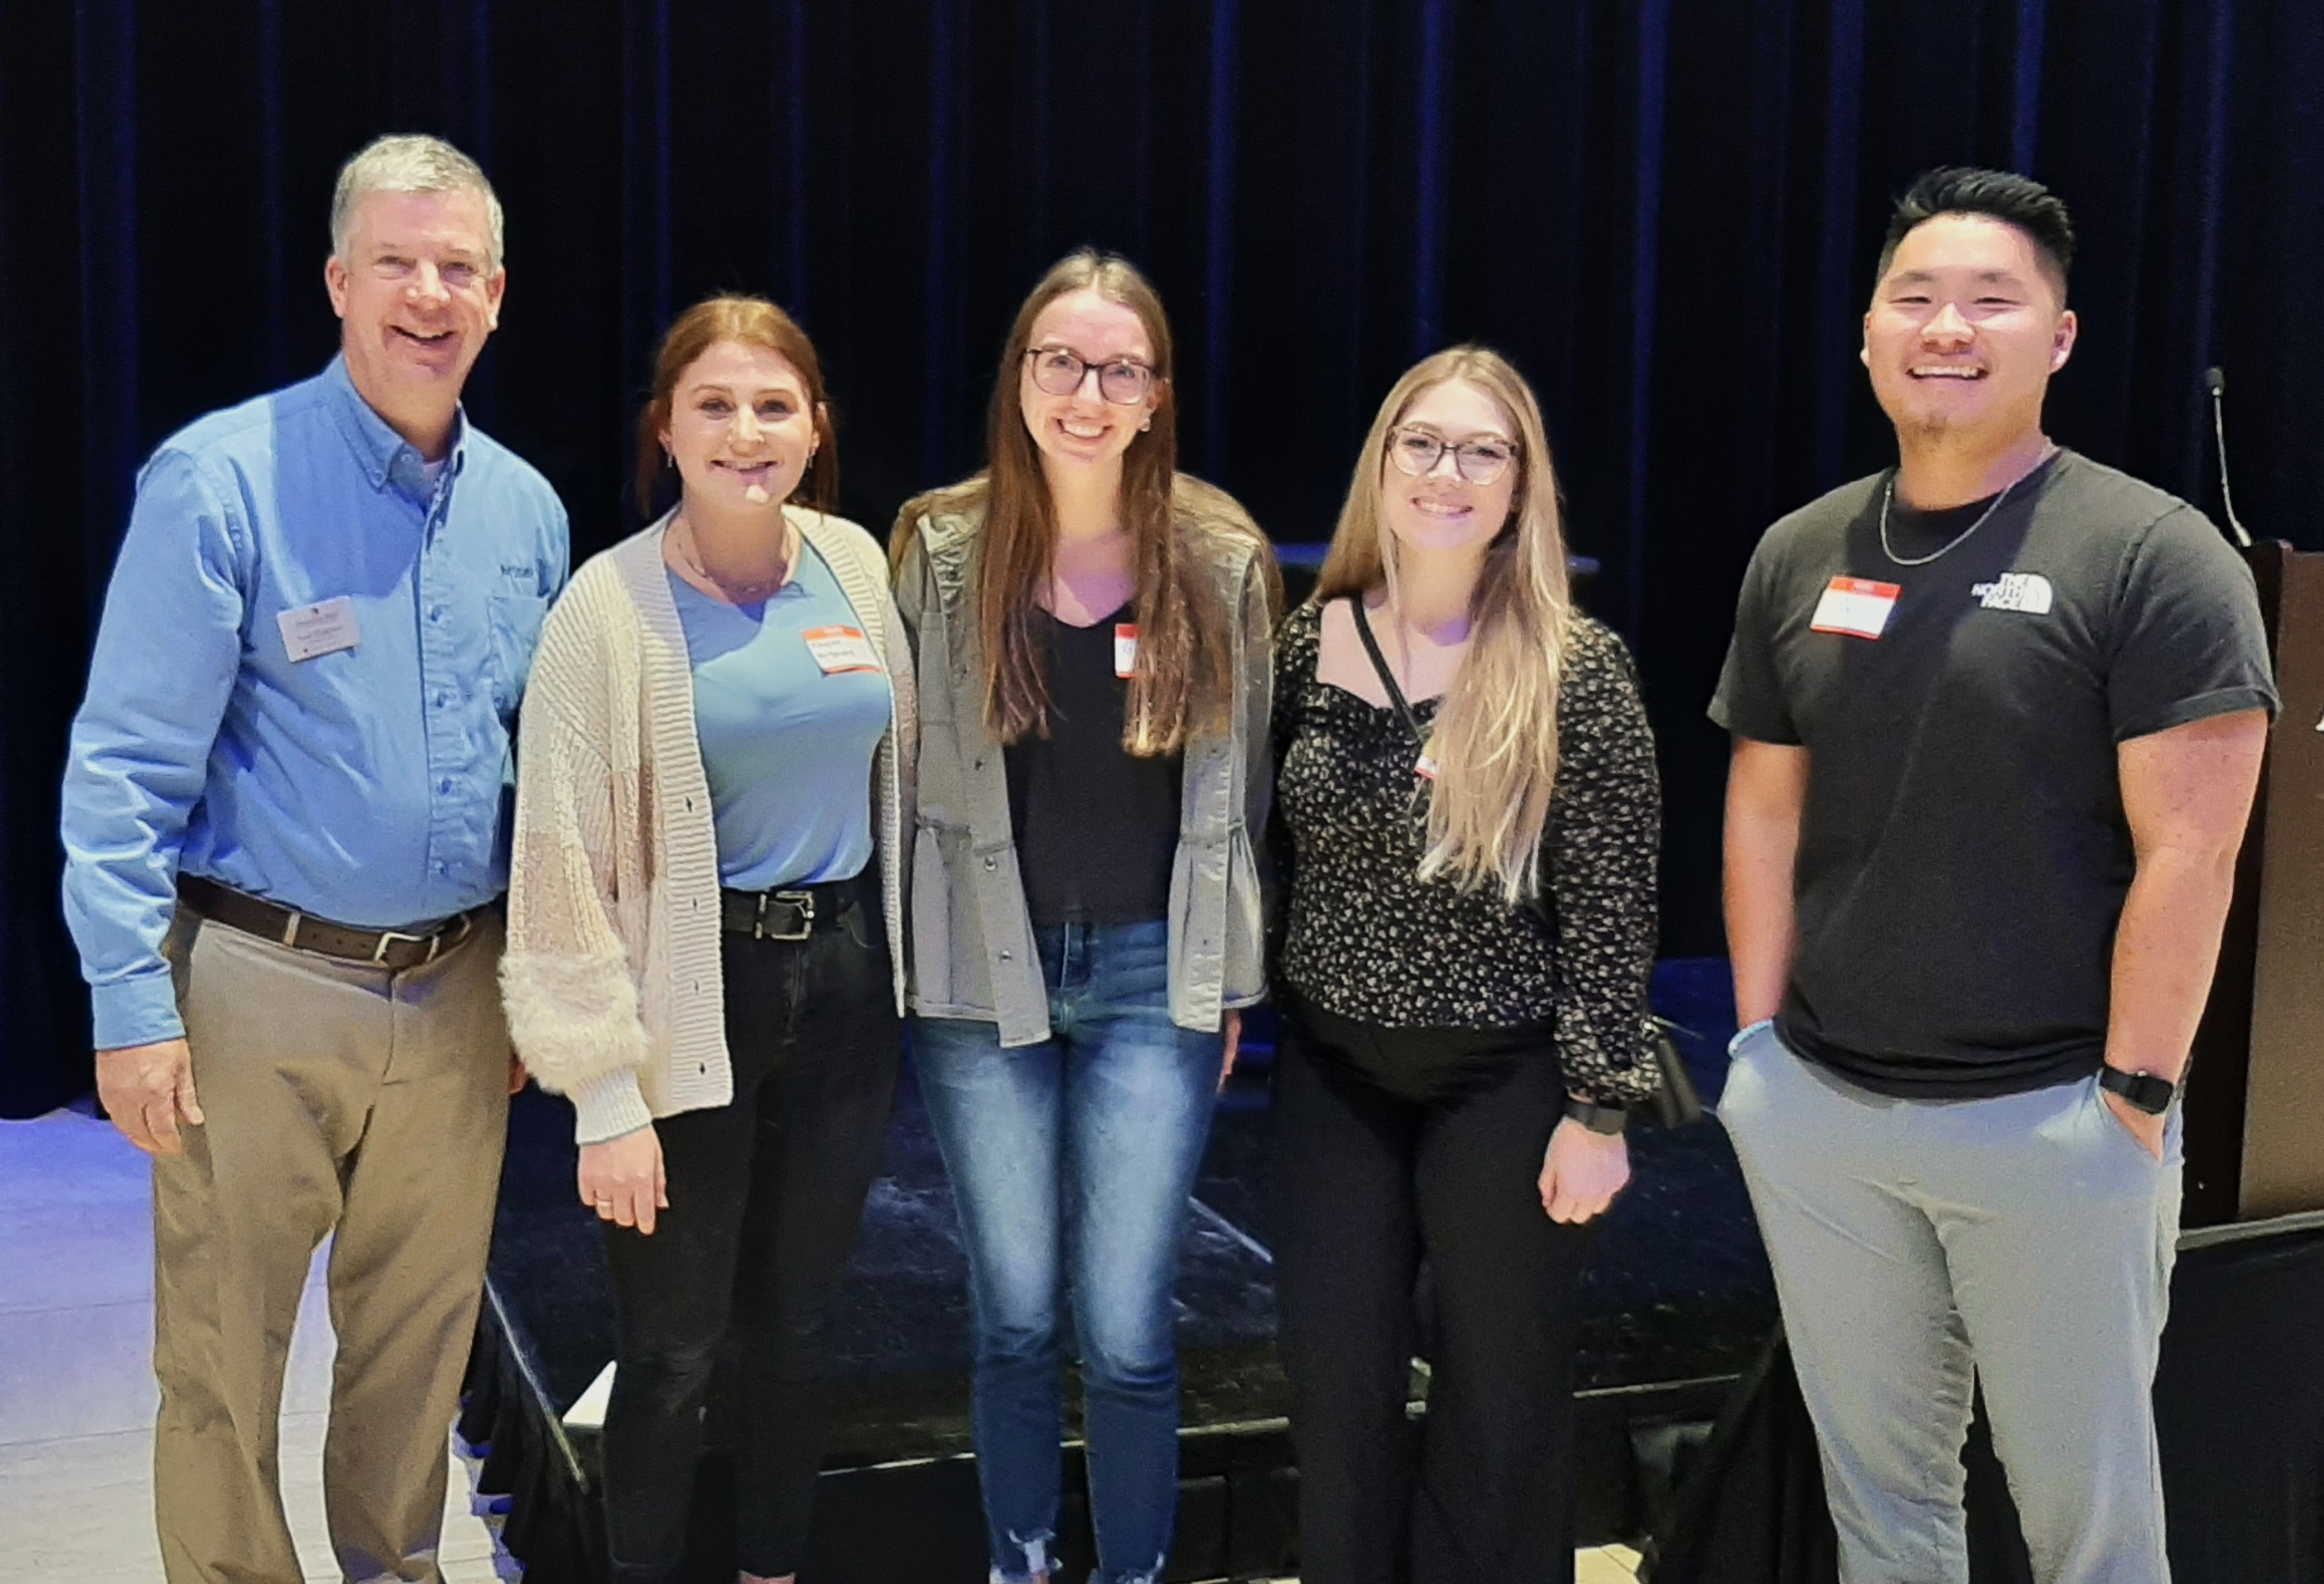 M State SHRM student chapter members Kaylee Maendel, Raenah Kaisner, Katie Monk and Sam Johnson, left to right, with chapter advisor and M State Human Resource Faculty member Loren Haagenson, far left.